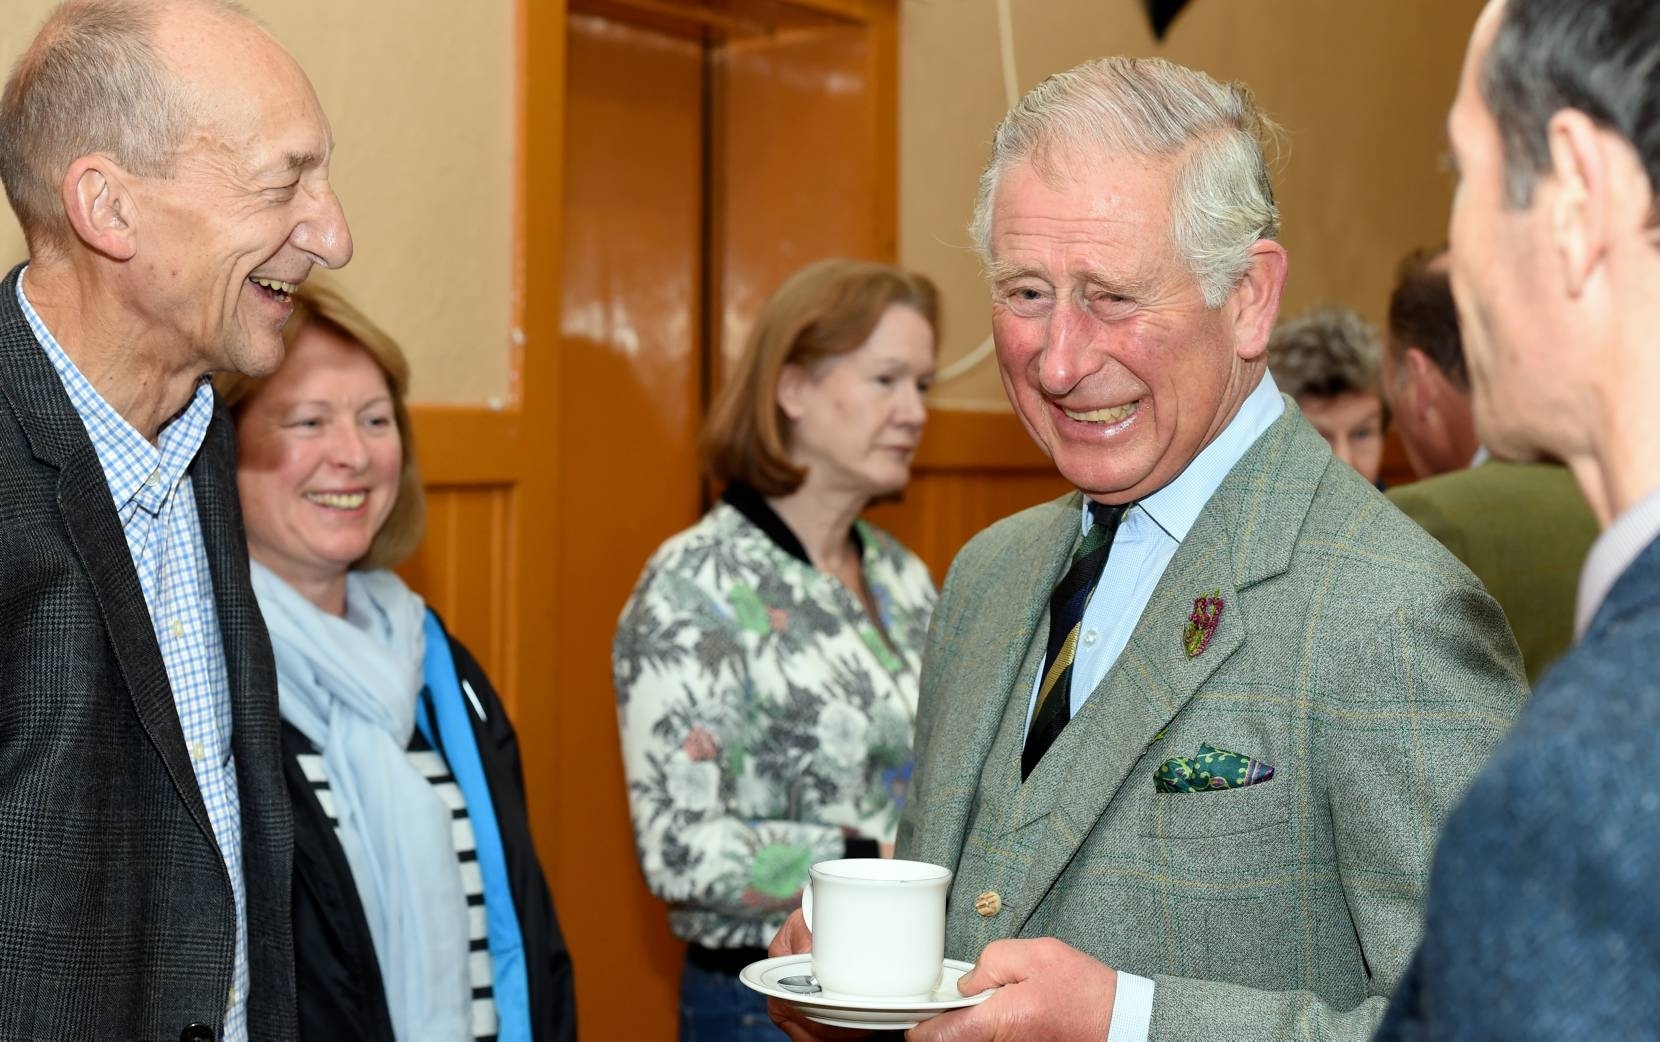 The Duke of Rothesay opens the Braemar Hydro Electric Plant scheme's turbine house at Linn of Dee Road then attends a reception with members of the community who invested in the scheme at Braemar Village Hall.